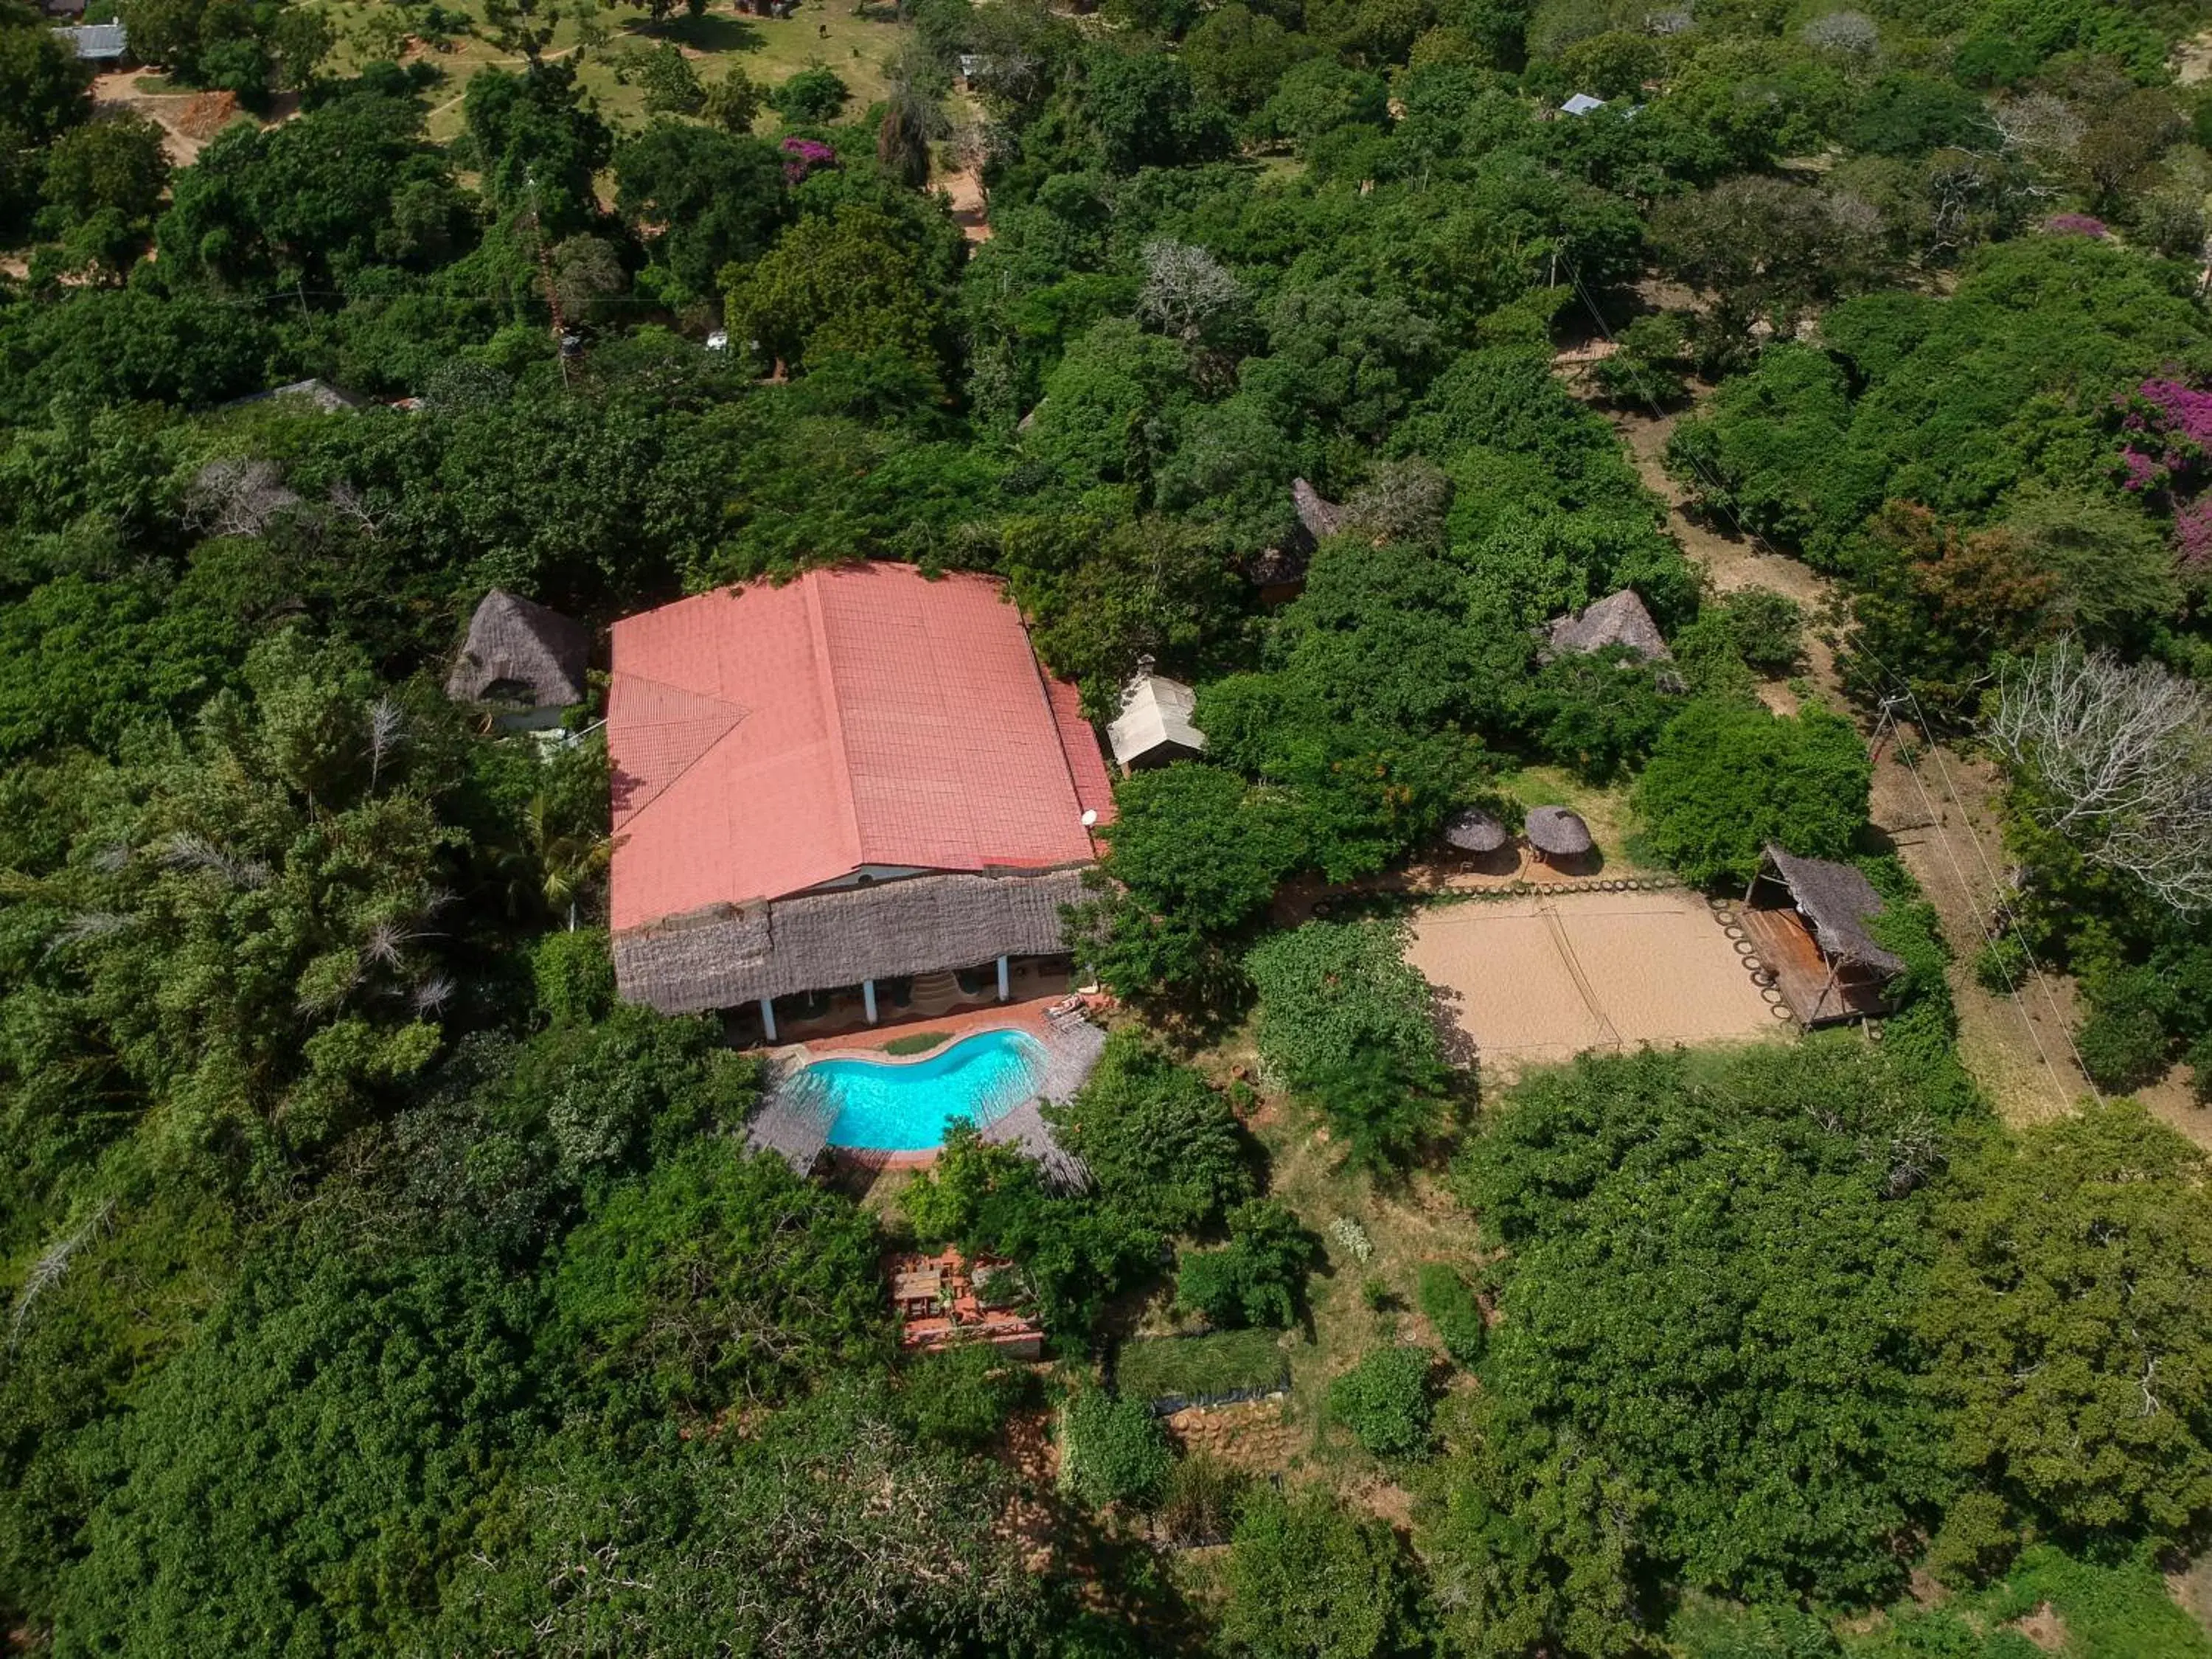 Bird's eye view, Bird's-eye View in Distant Relatives Ecolodge & Backpackers